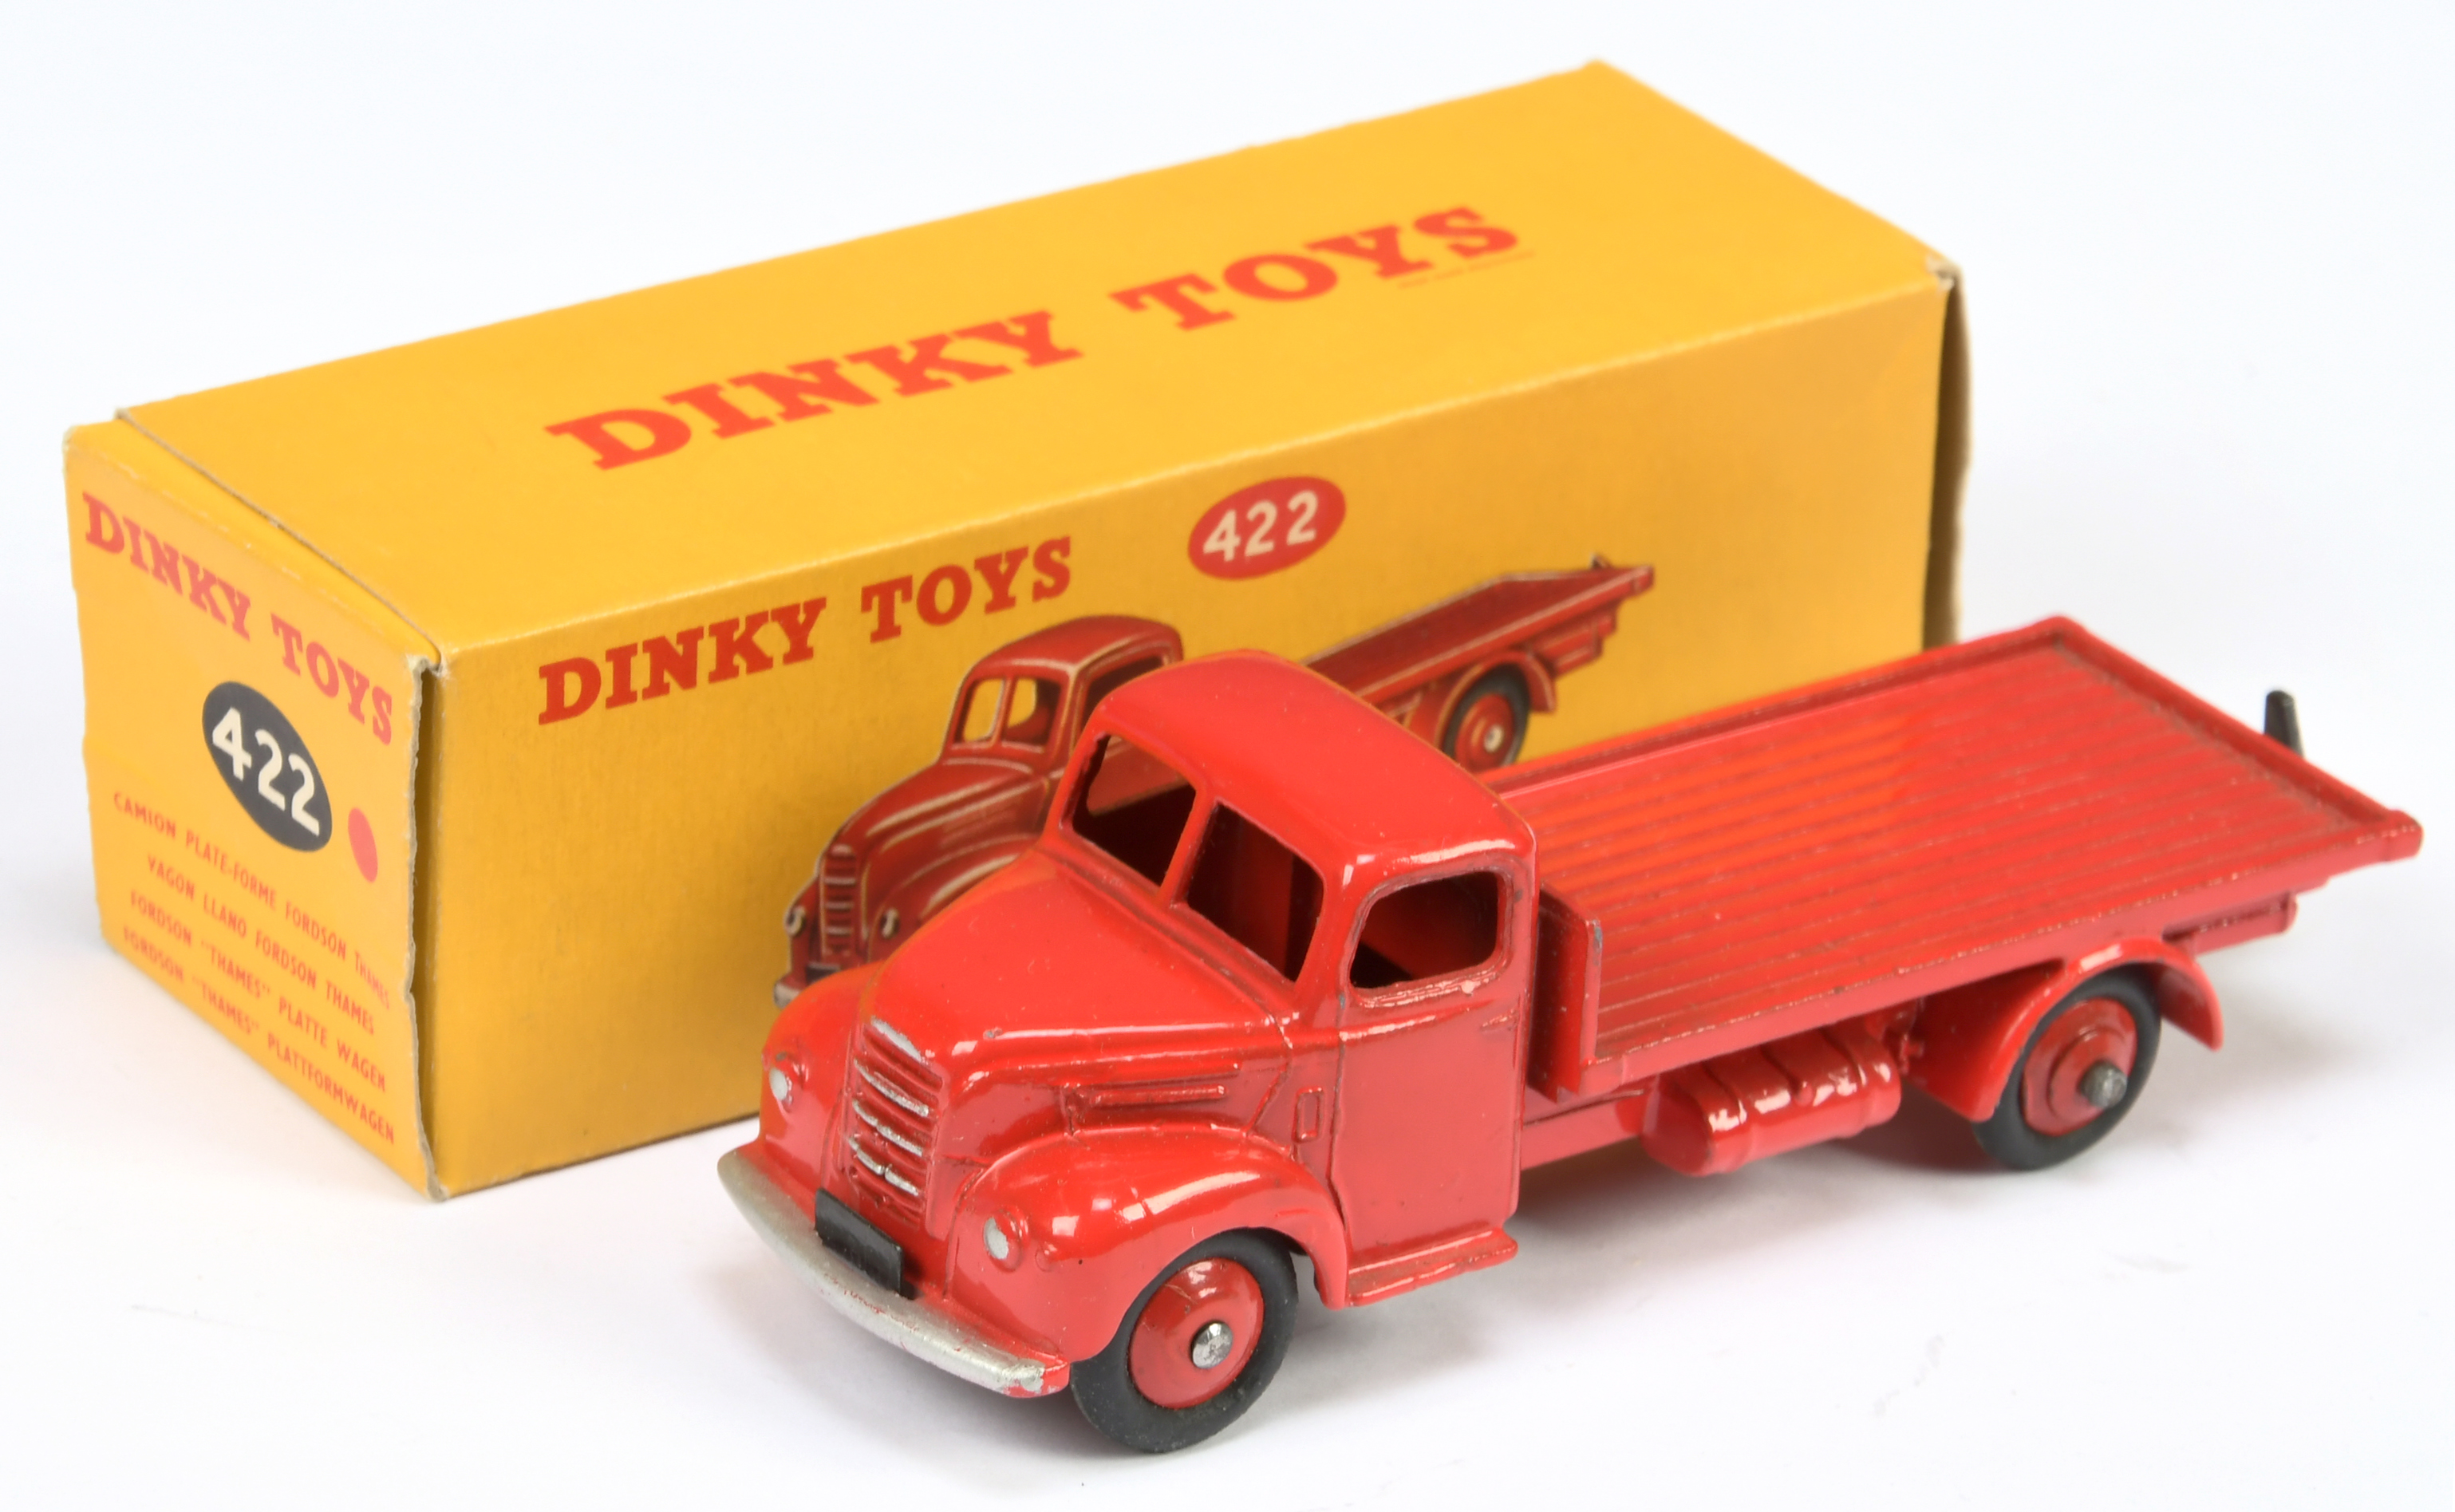 Dinky Toys 422 Fordson Thames Flat truck - Red cab, chassis, back and rigid hubs with smooth hubs...